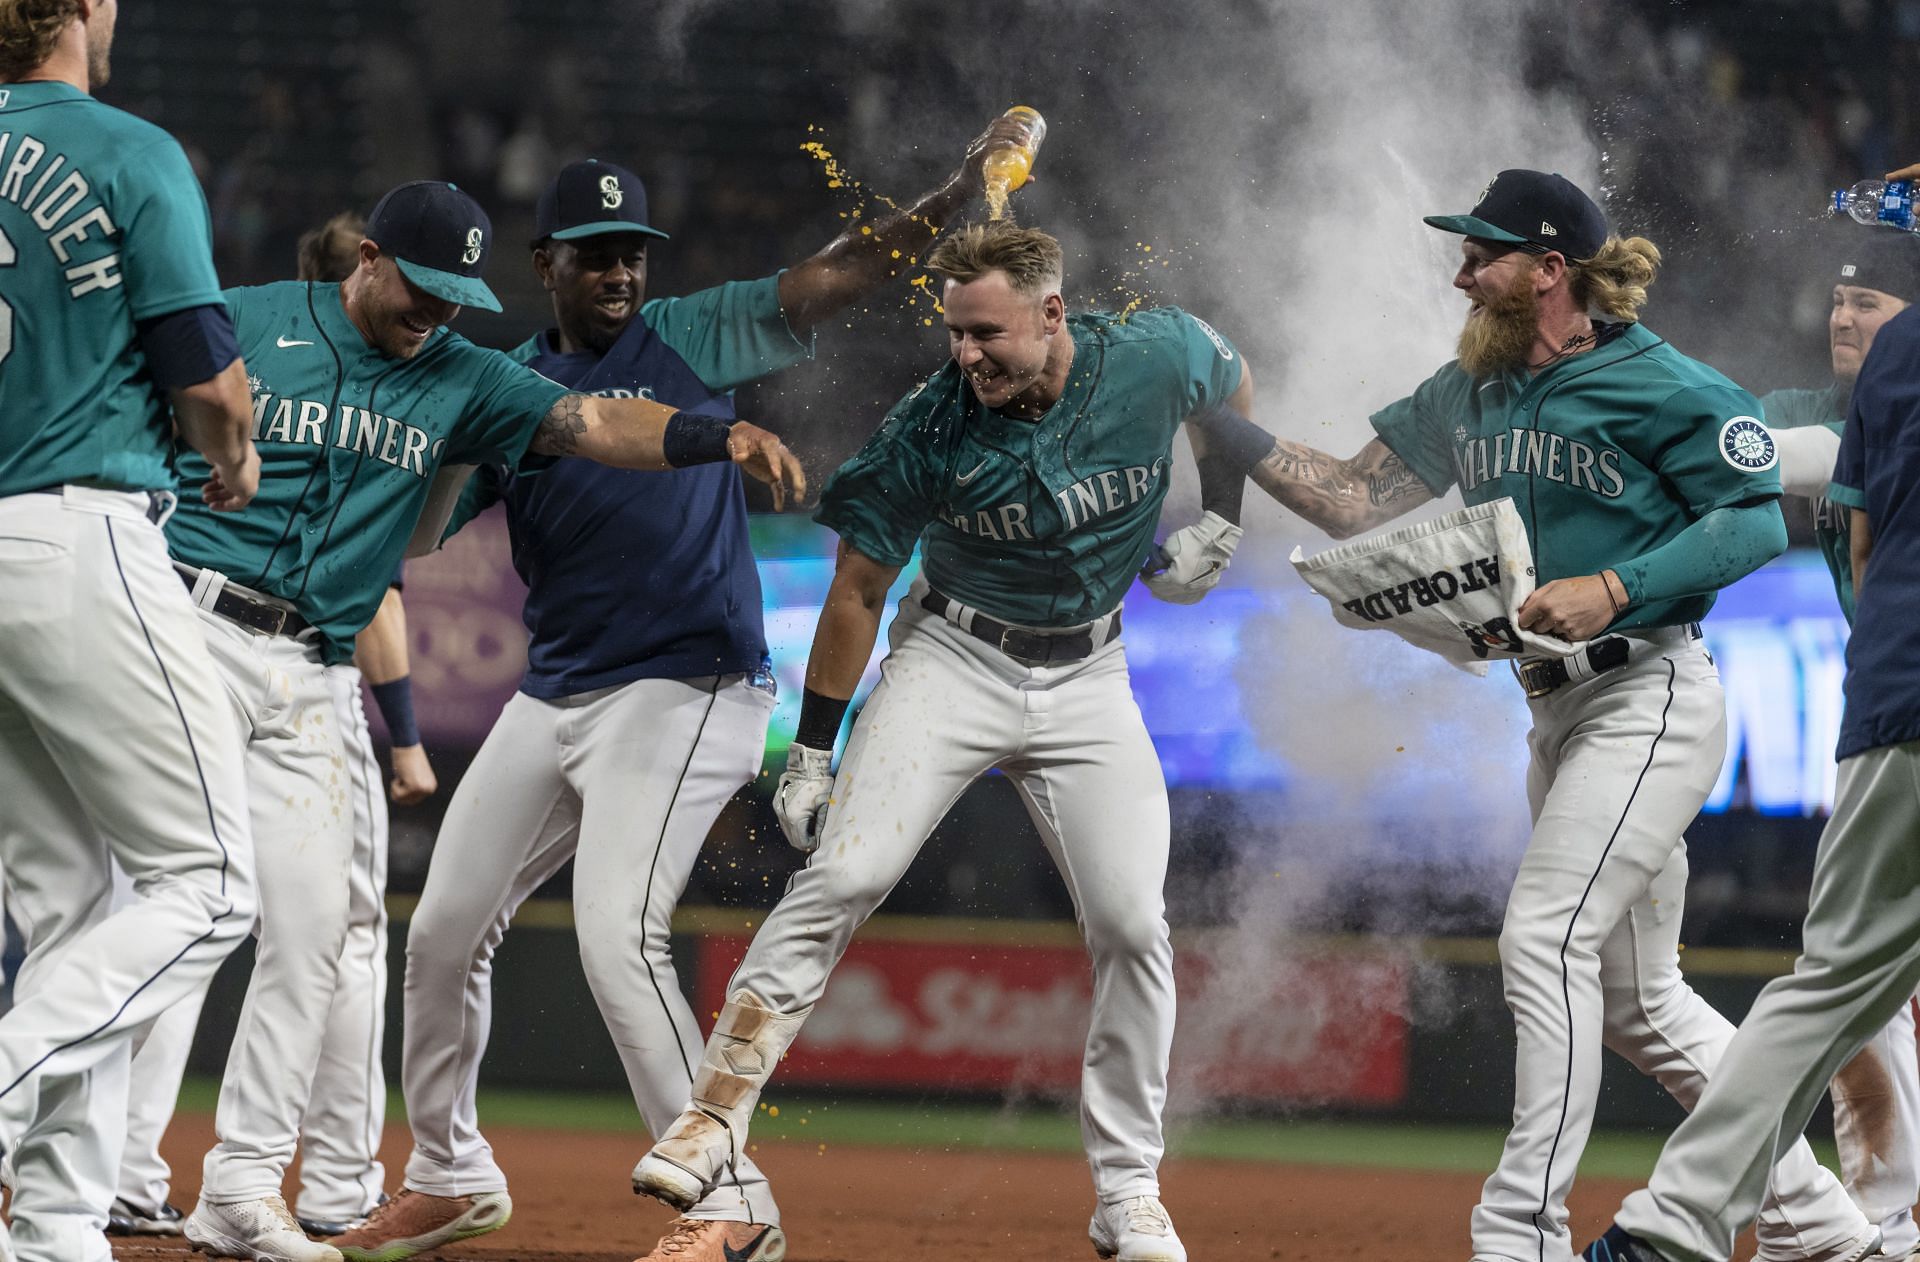 The Mariners led the league in fun differential